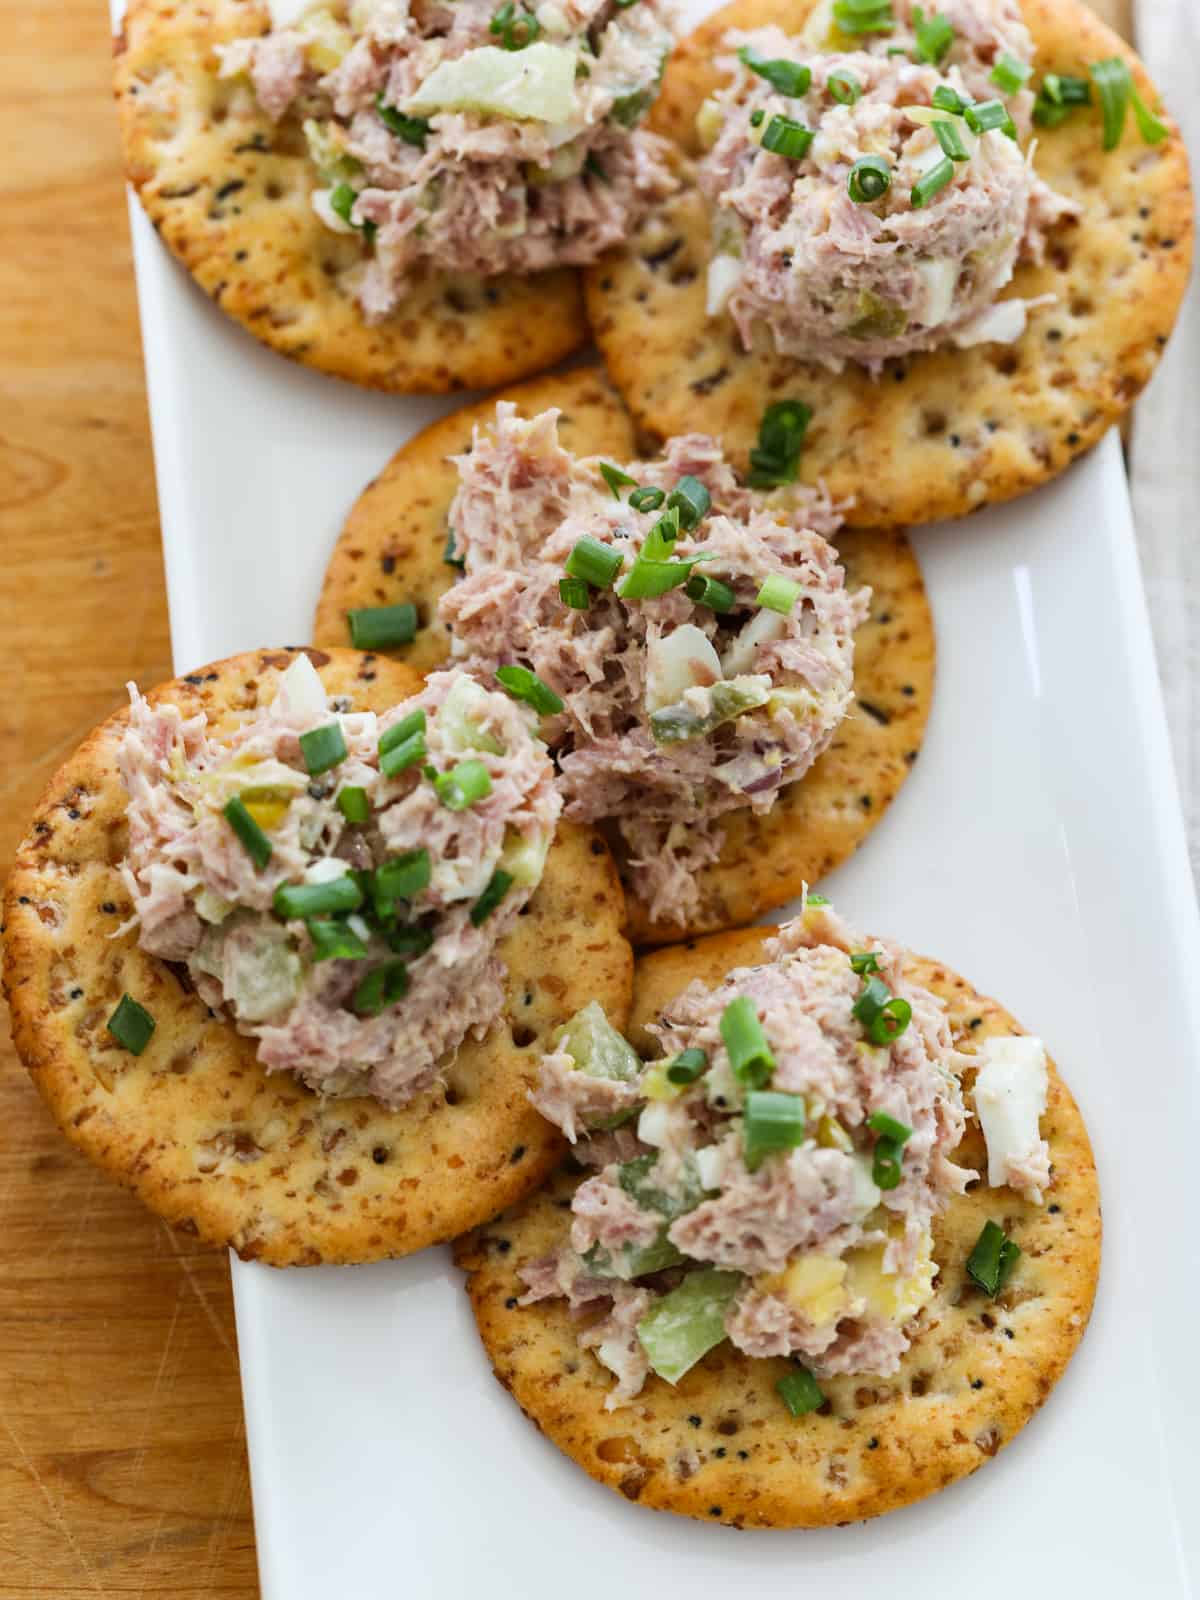 Ham salad scooped on round seeded crackers garnished with chives for an easy snack.